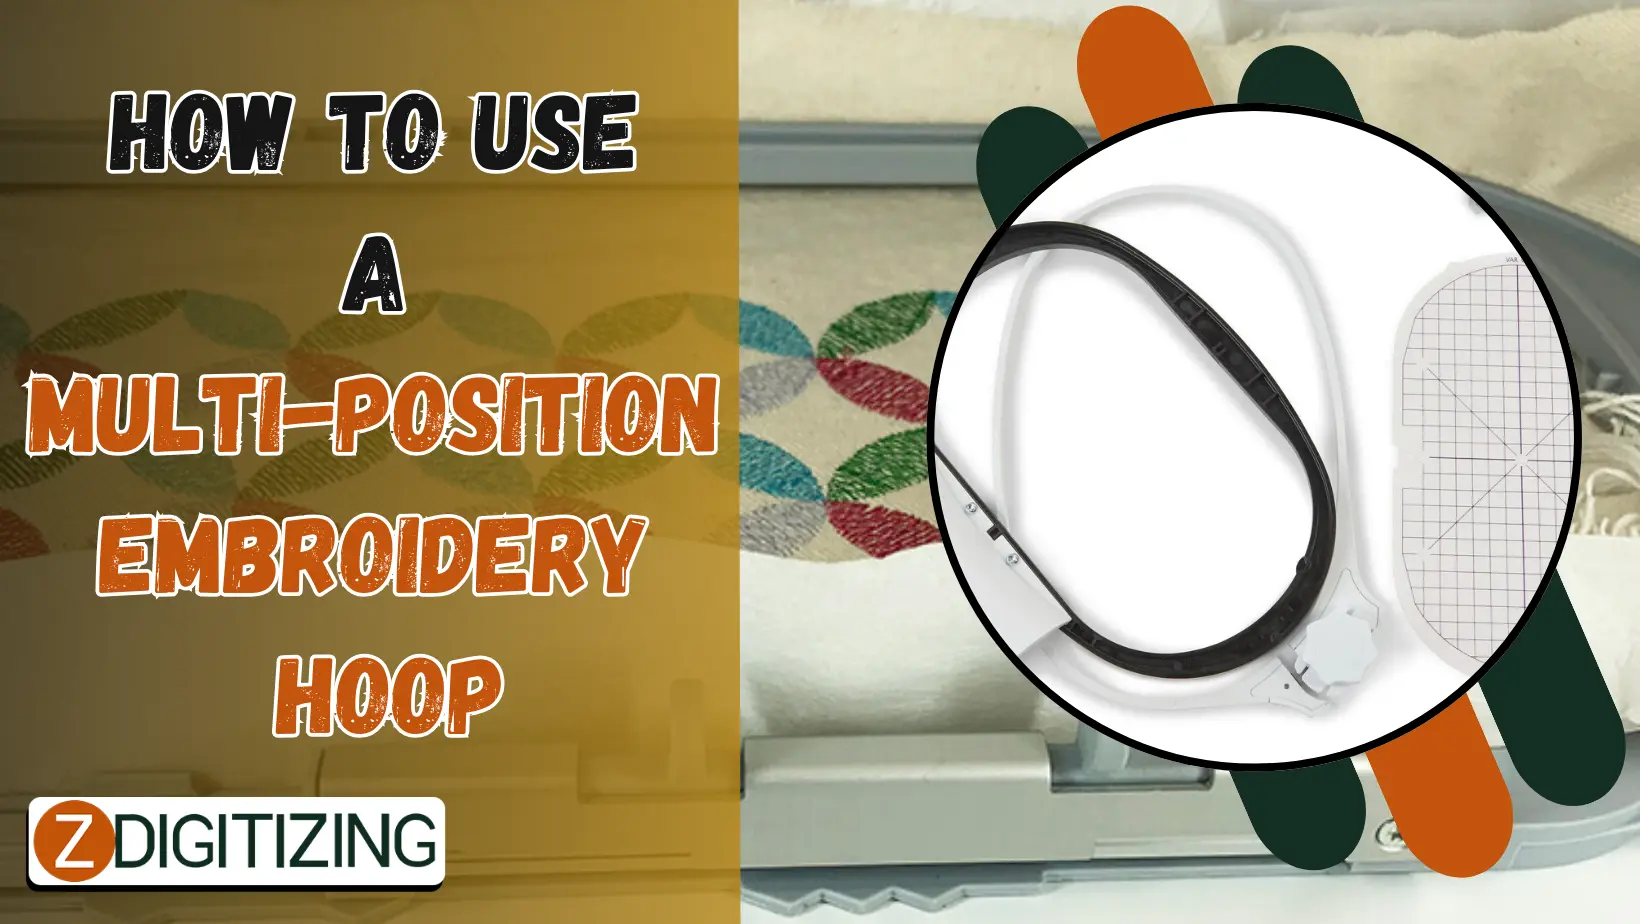 How to use a multi-position embroidery hoop